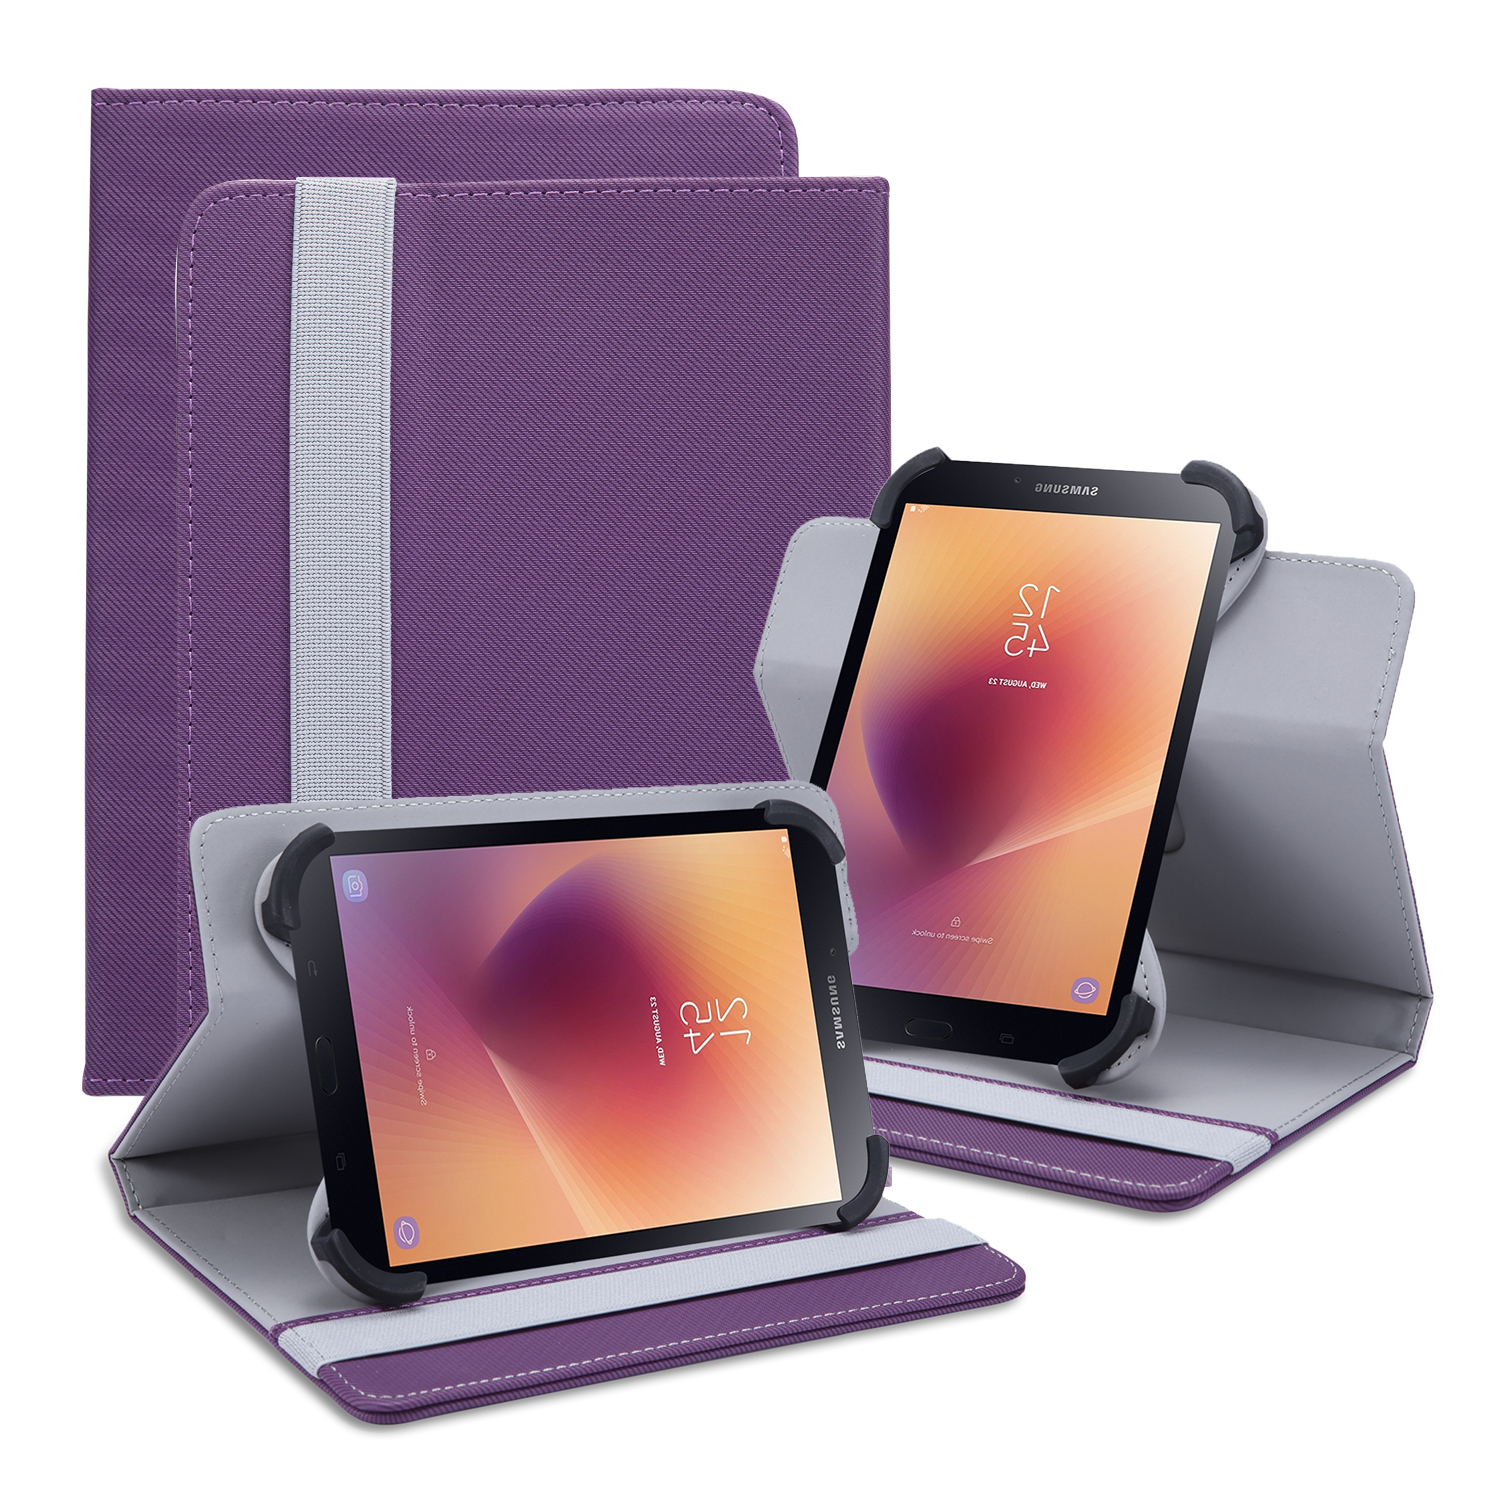 Universal Protective LEATHER Cover Case for Universal 7 Inch Tablets (Purple)